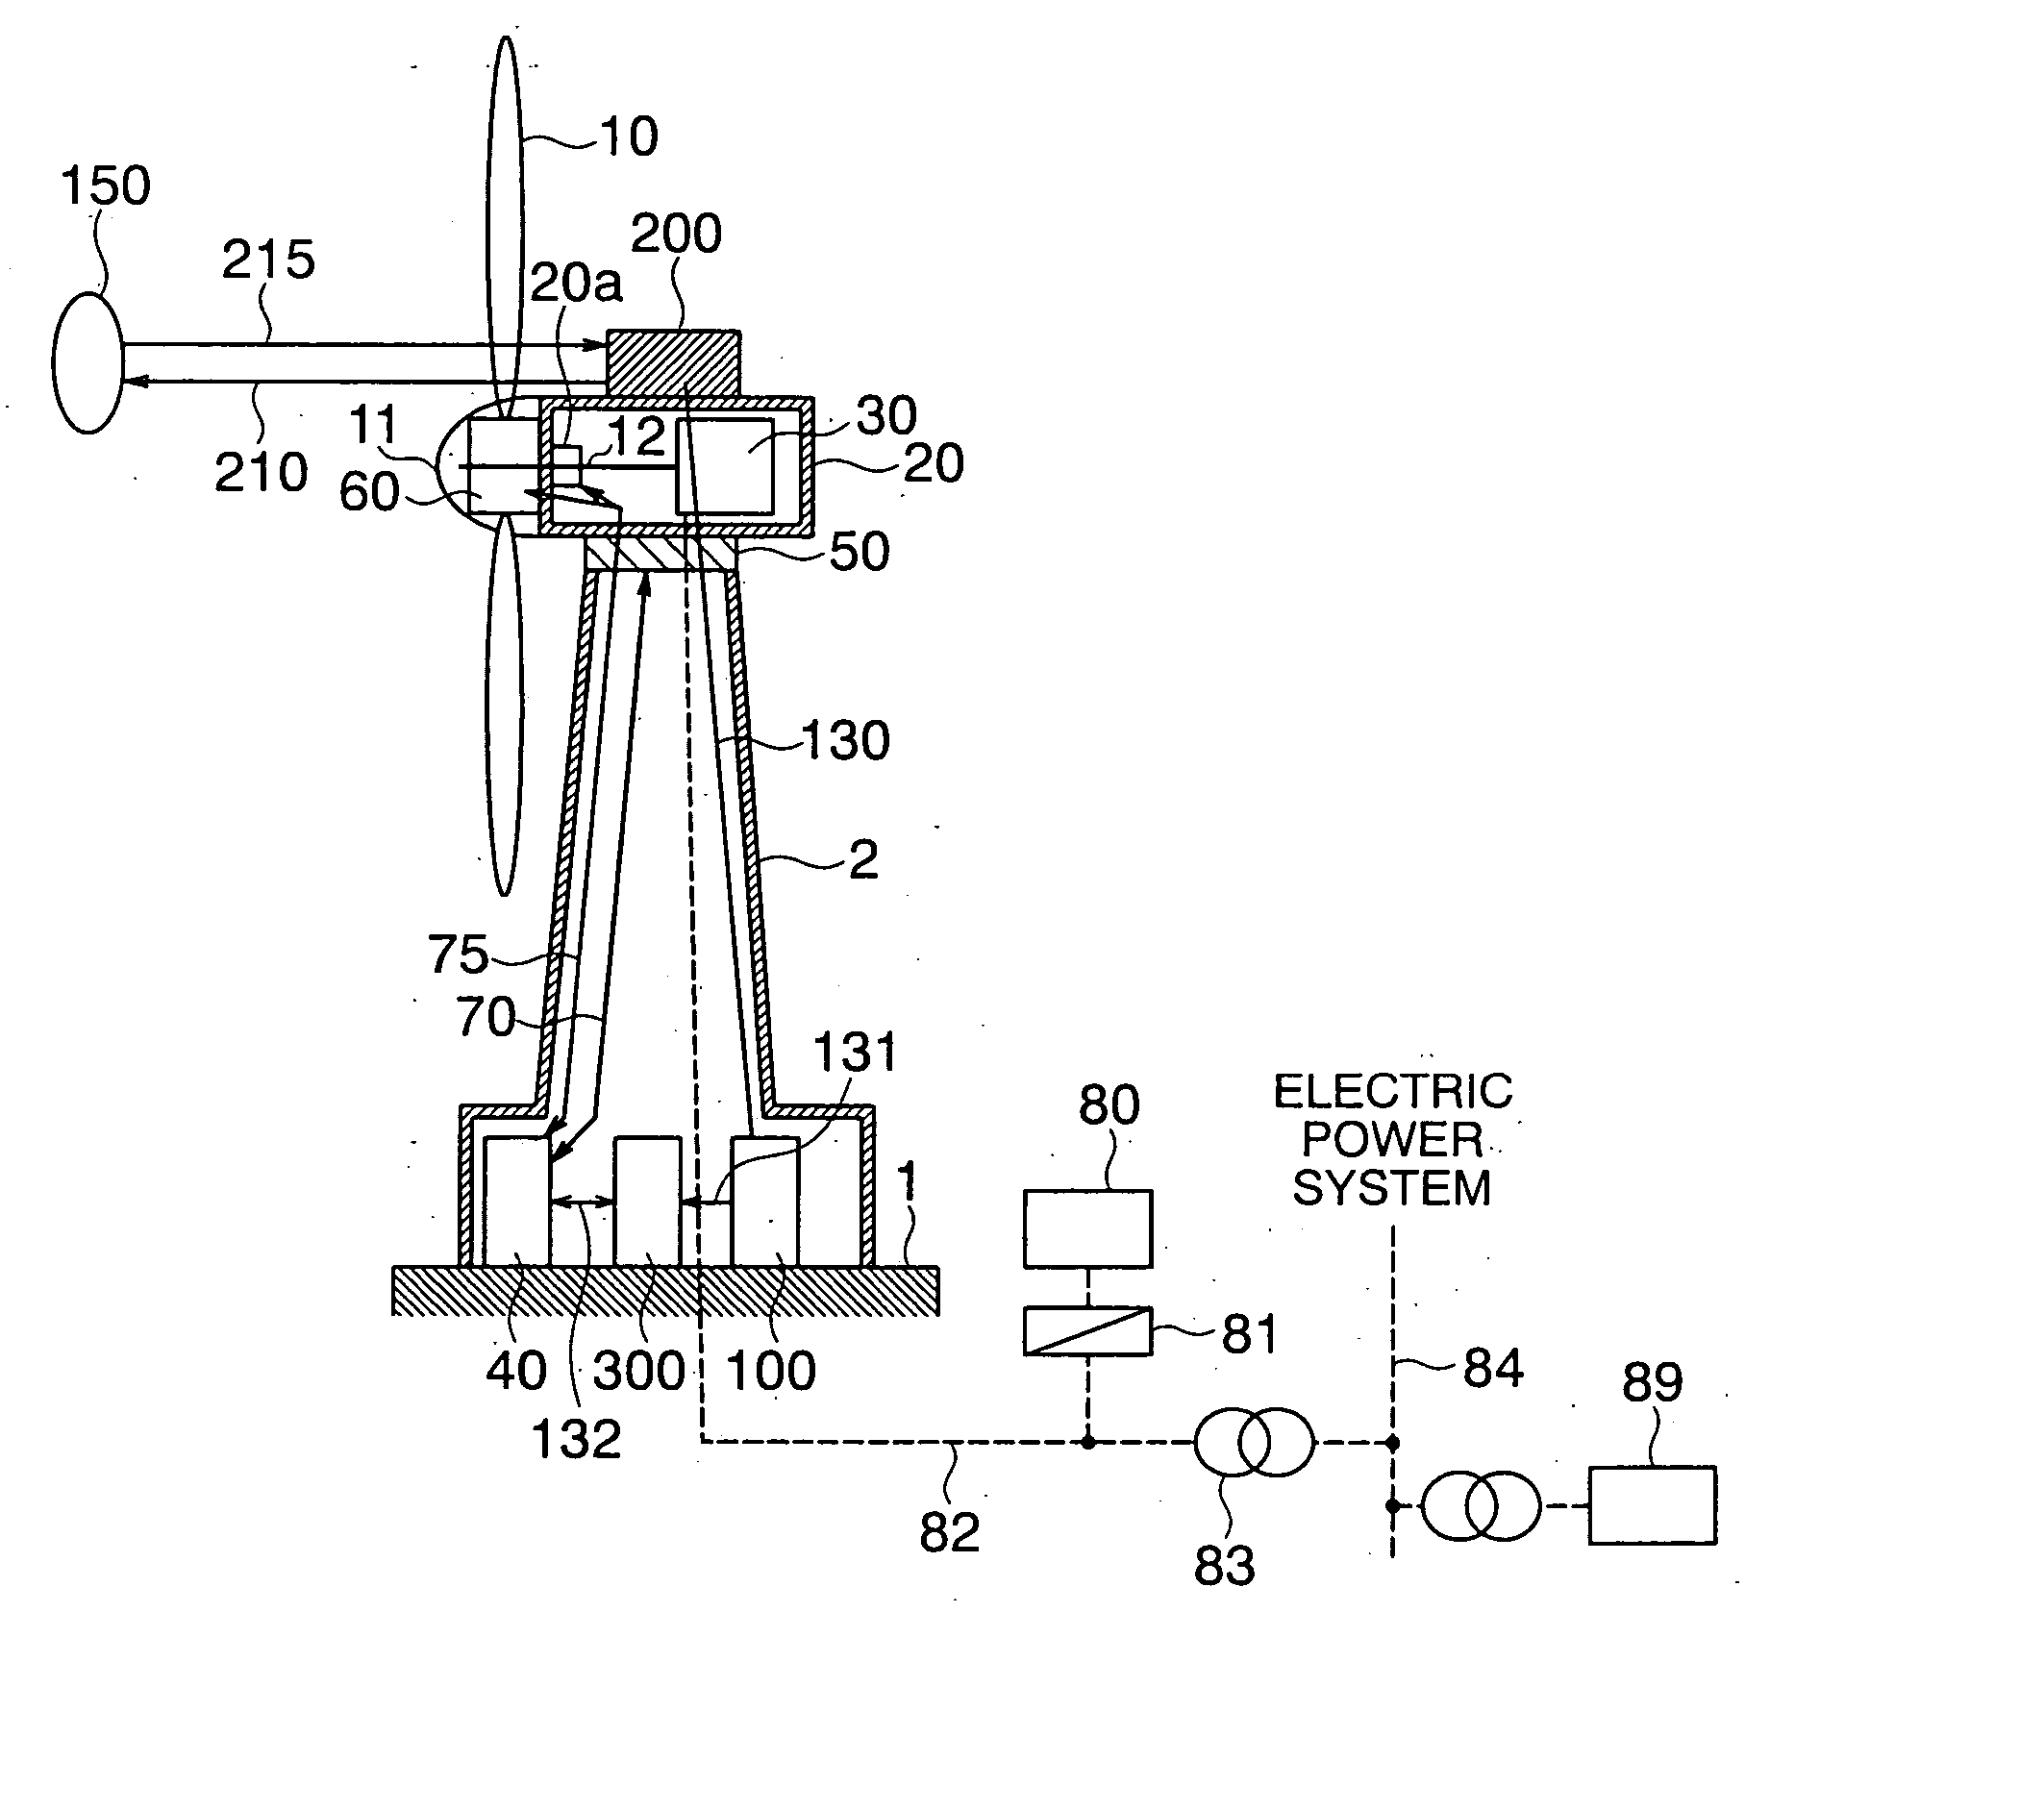 Wind power generation evaluation system and predictive control service system for use with wind power generator